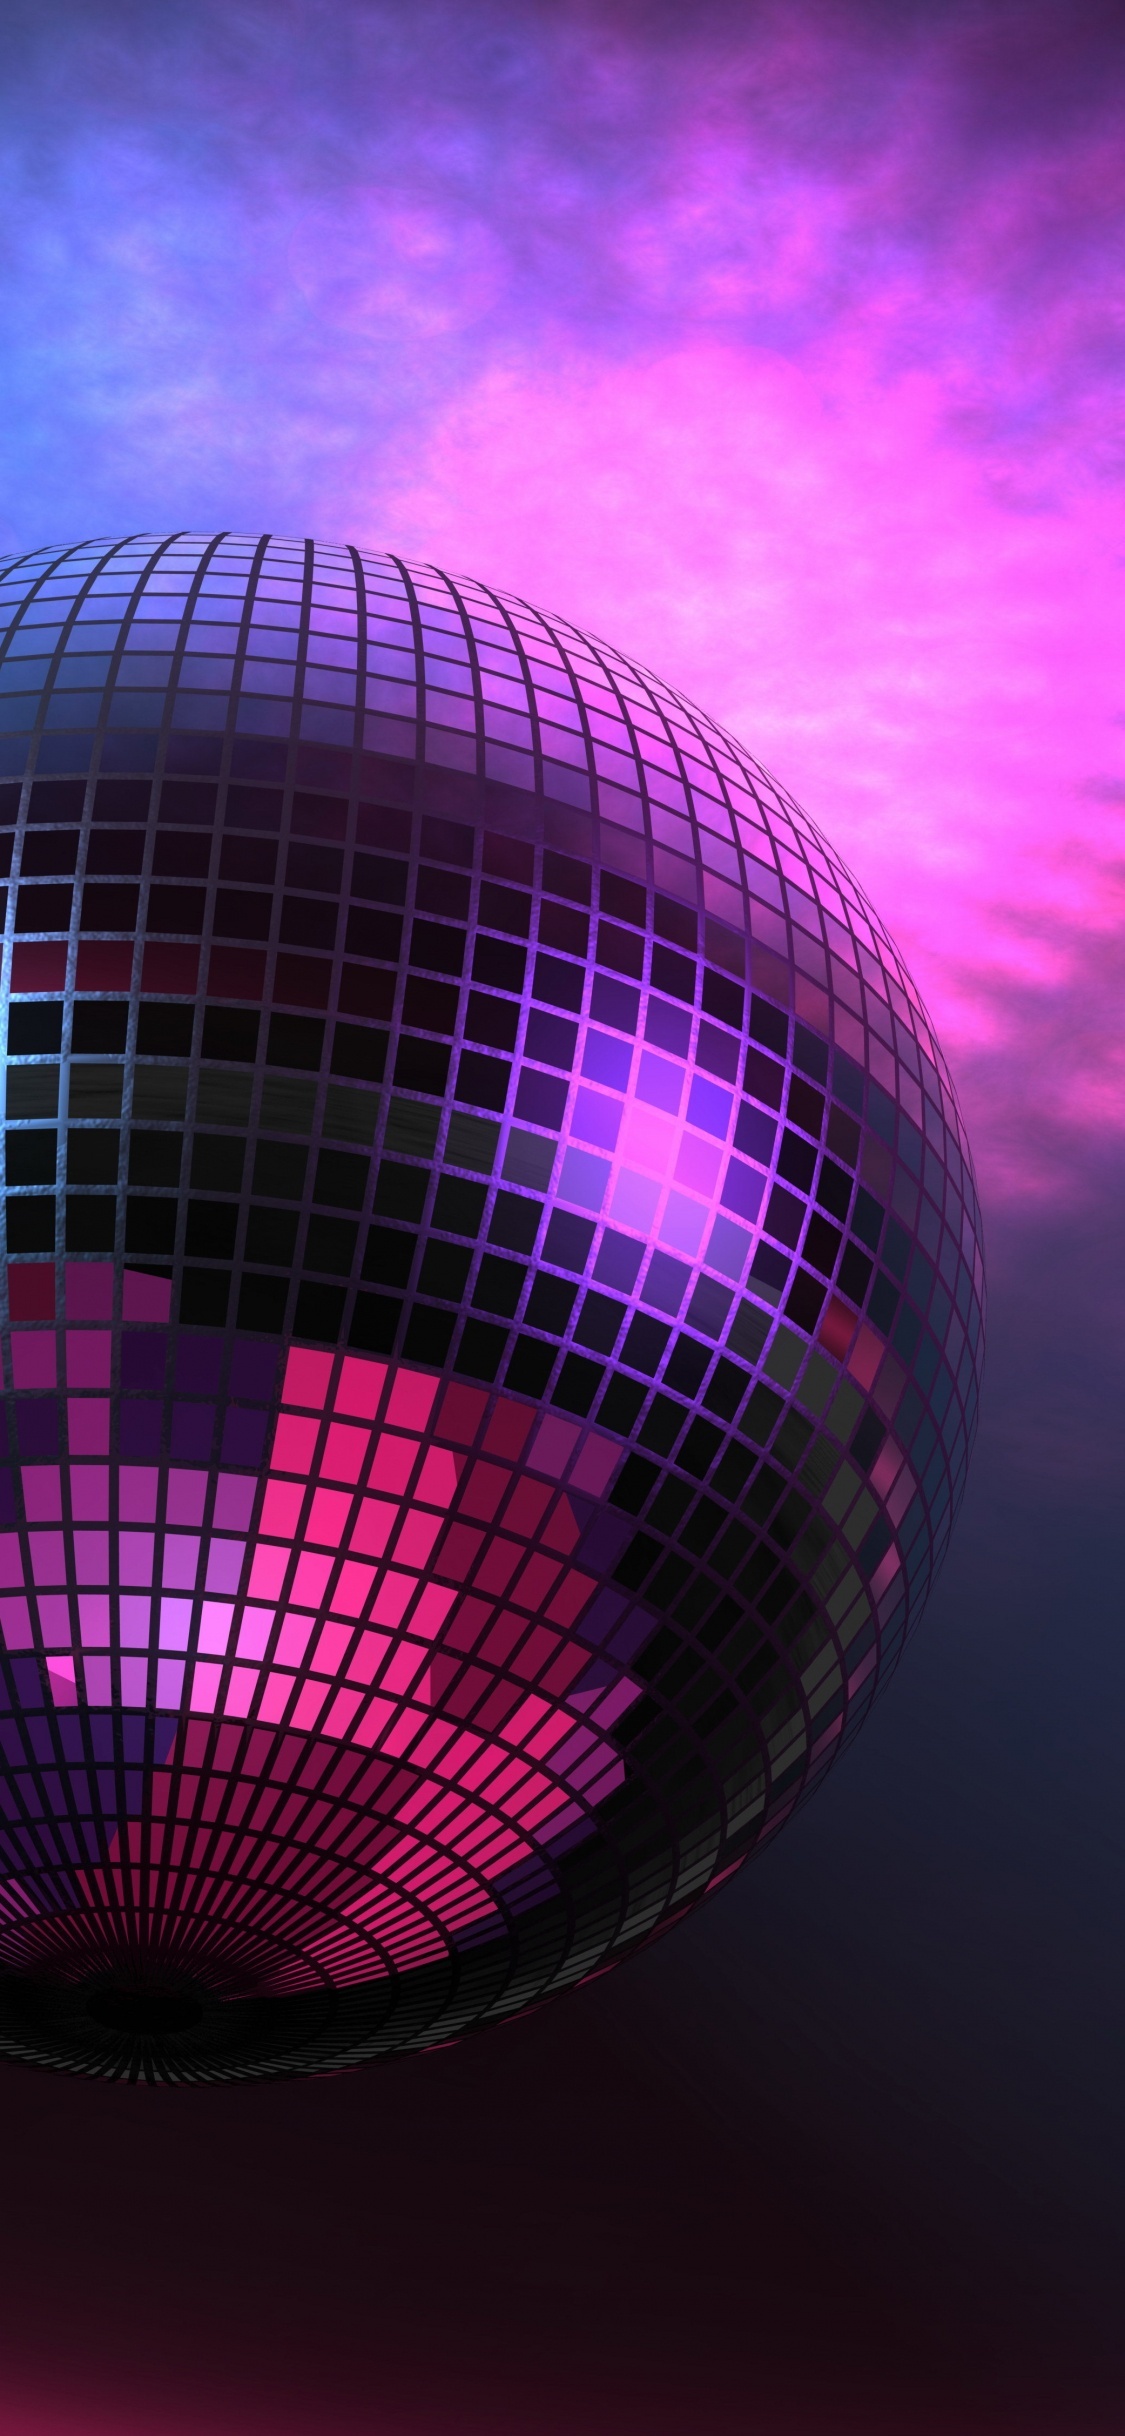 Discothque iPhone wallpapers, Nightclub images, Stylish background, Phone dcor, 1130x2440 HD Phone